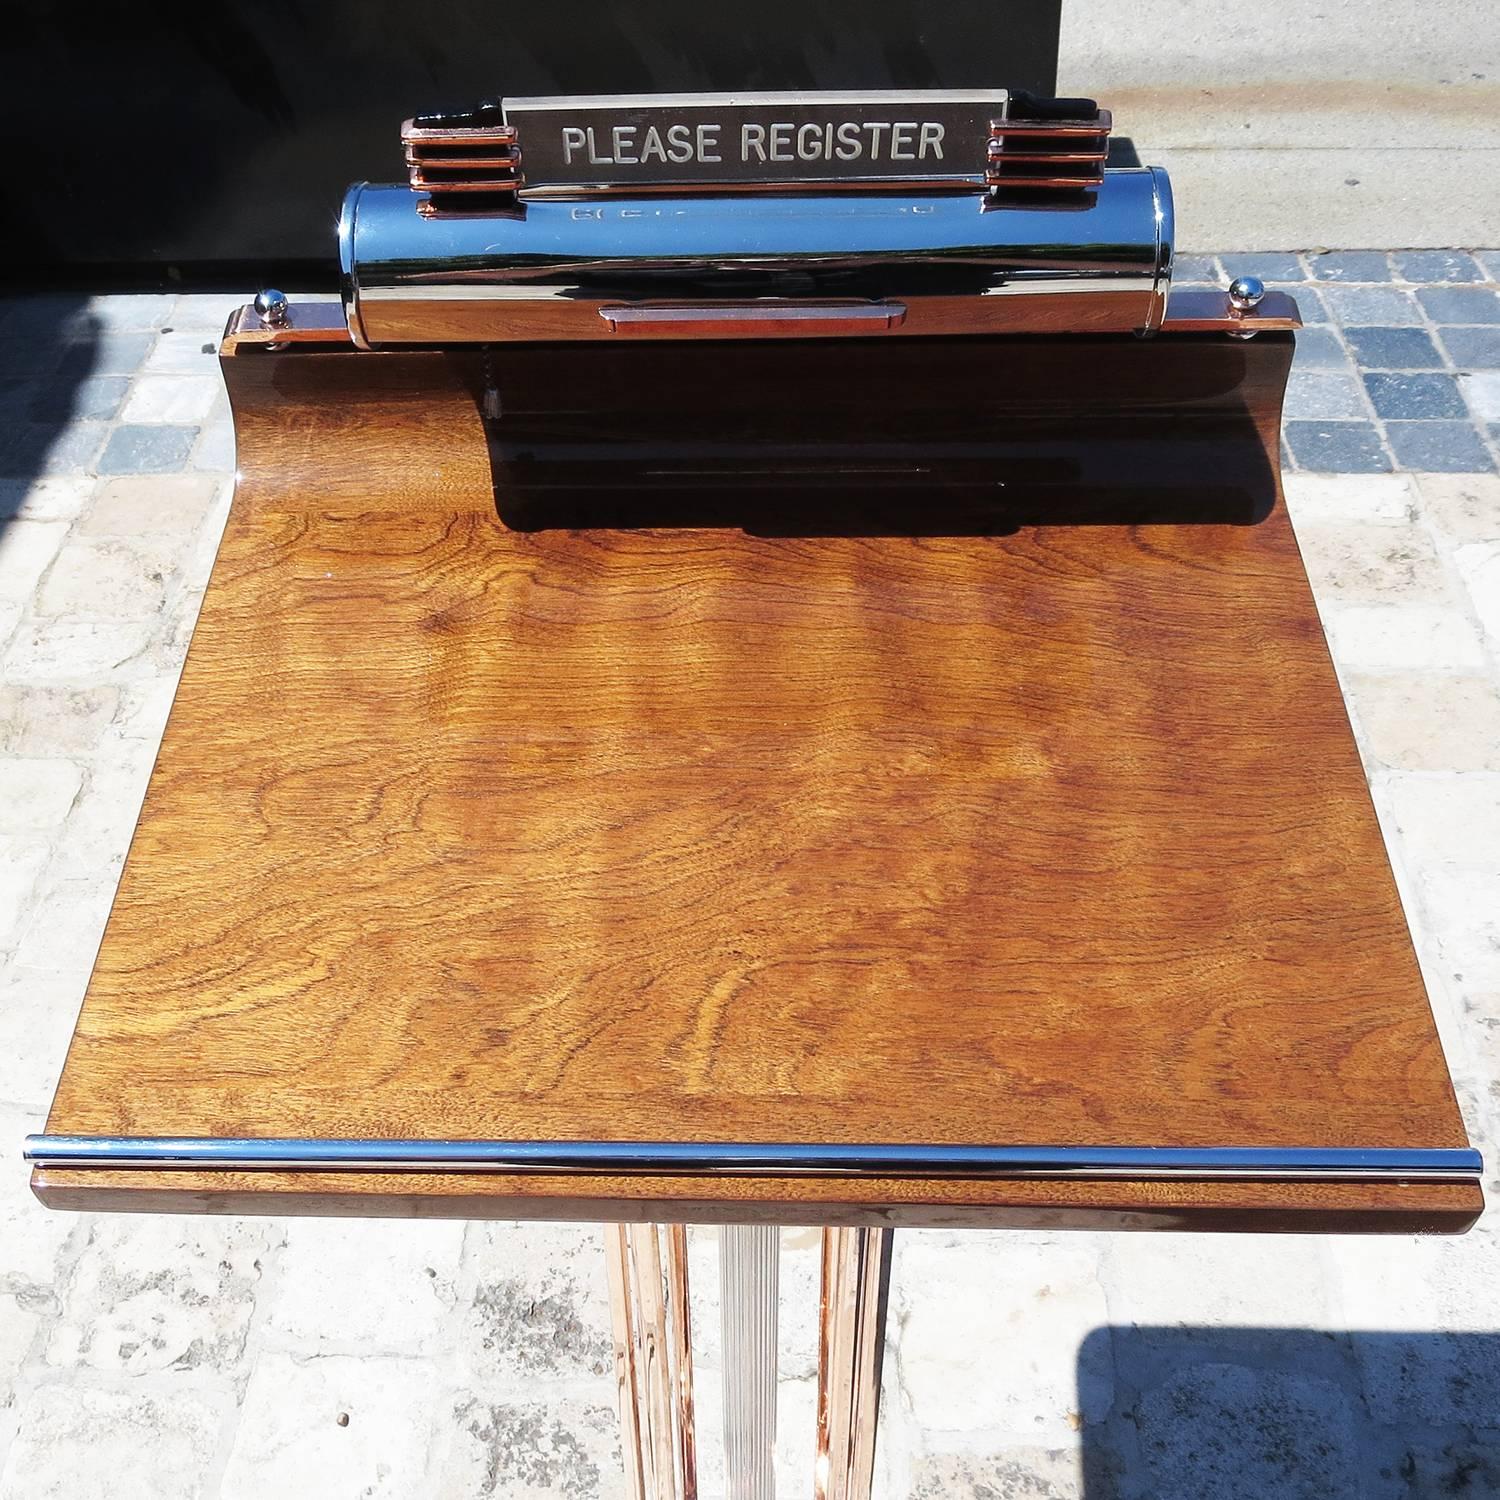 An incredibly glamorous stand in fully restored condition, this beauty will make a great first impression on everyone entering your home or place of business. All the copper and chrome elements have been re-plated, the wooden top has been refinished